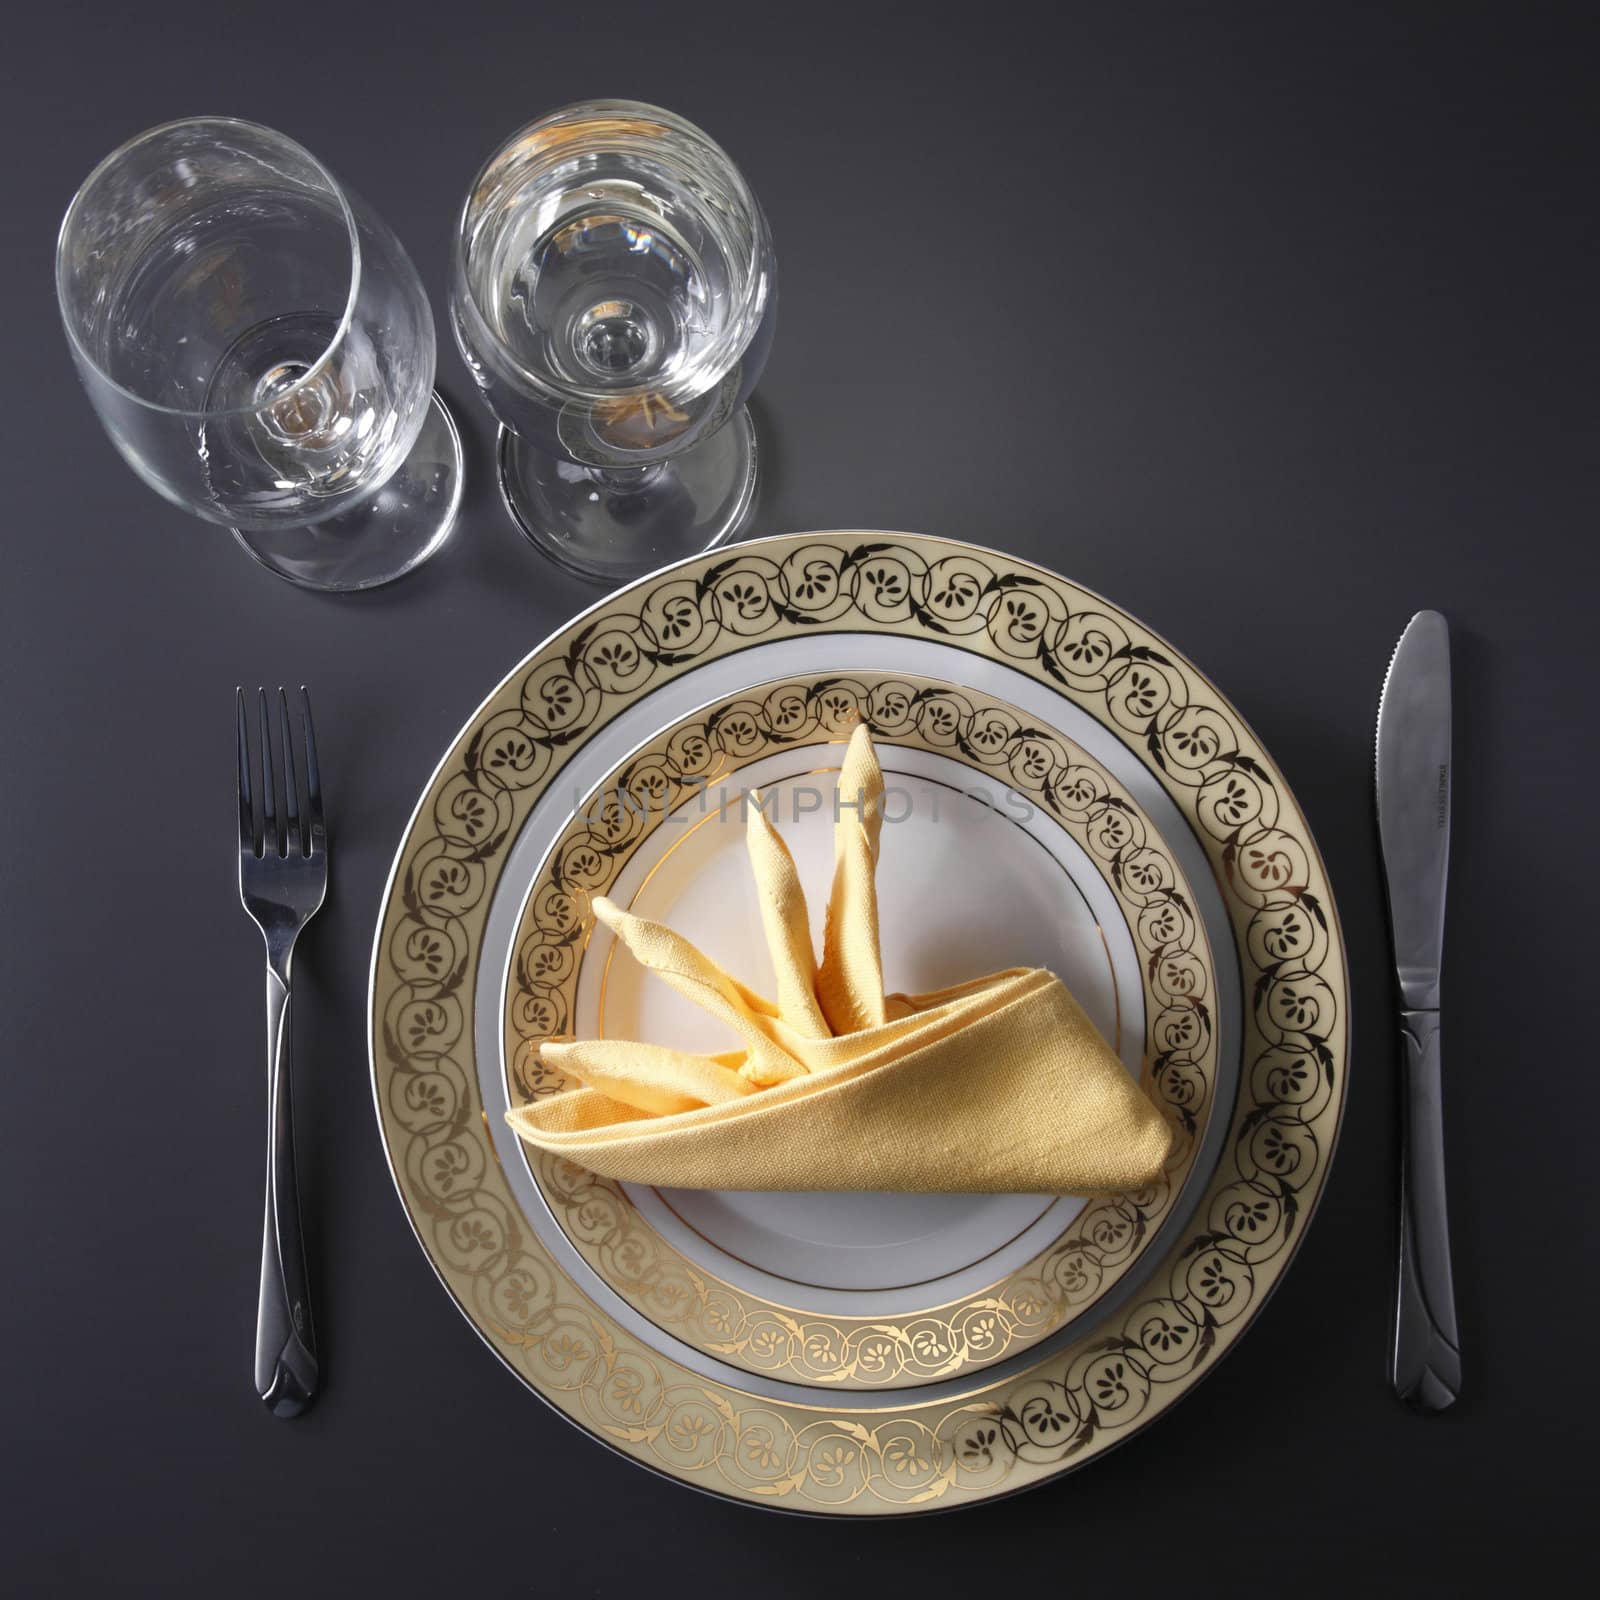 table setting for fine dining or party. cutlery and plate set up for wedding celebration 